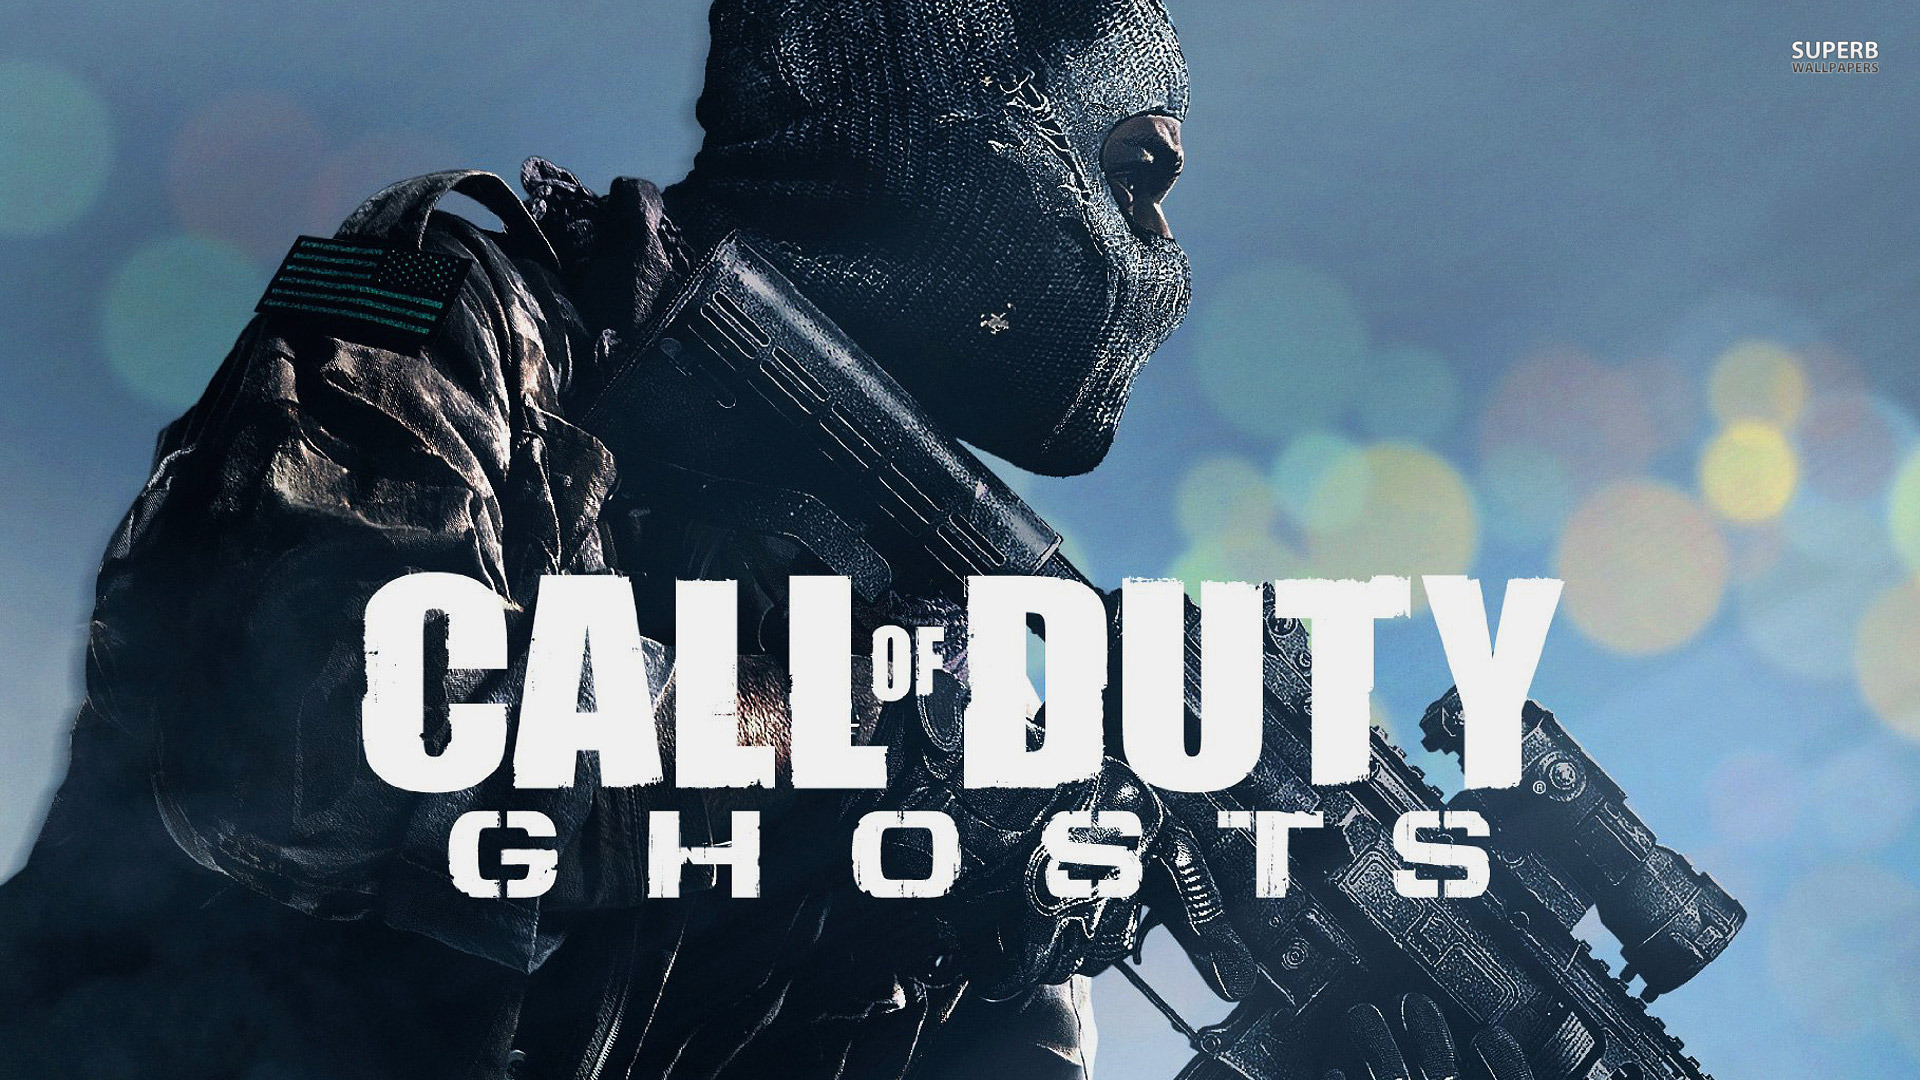 Download hd 1920x1080 Call Of Duty: Ghosts PC wallpaper ID:215892 for free